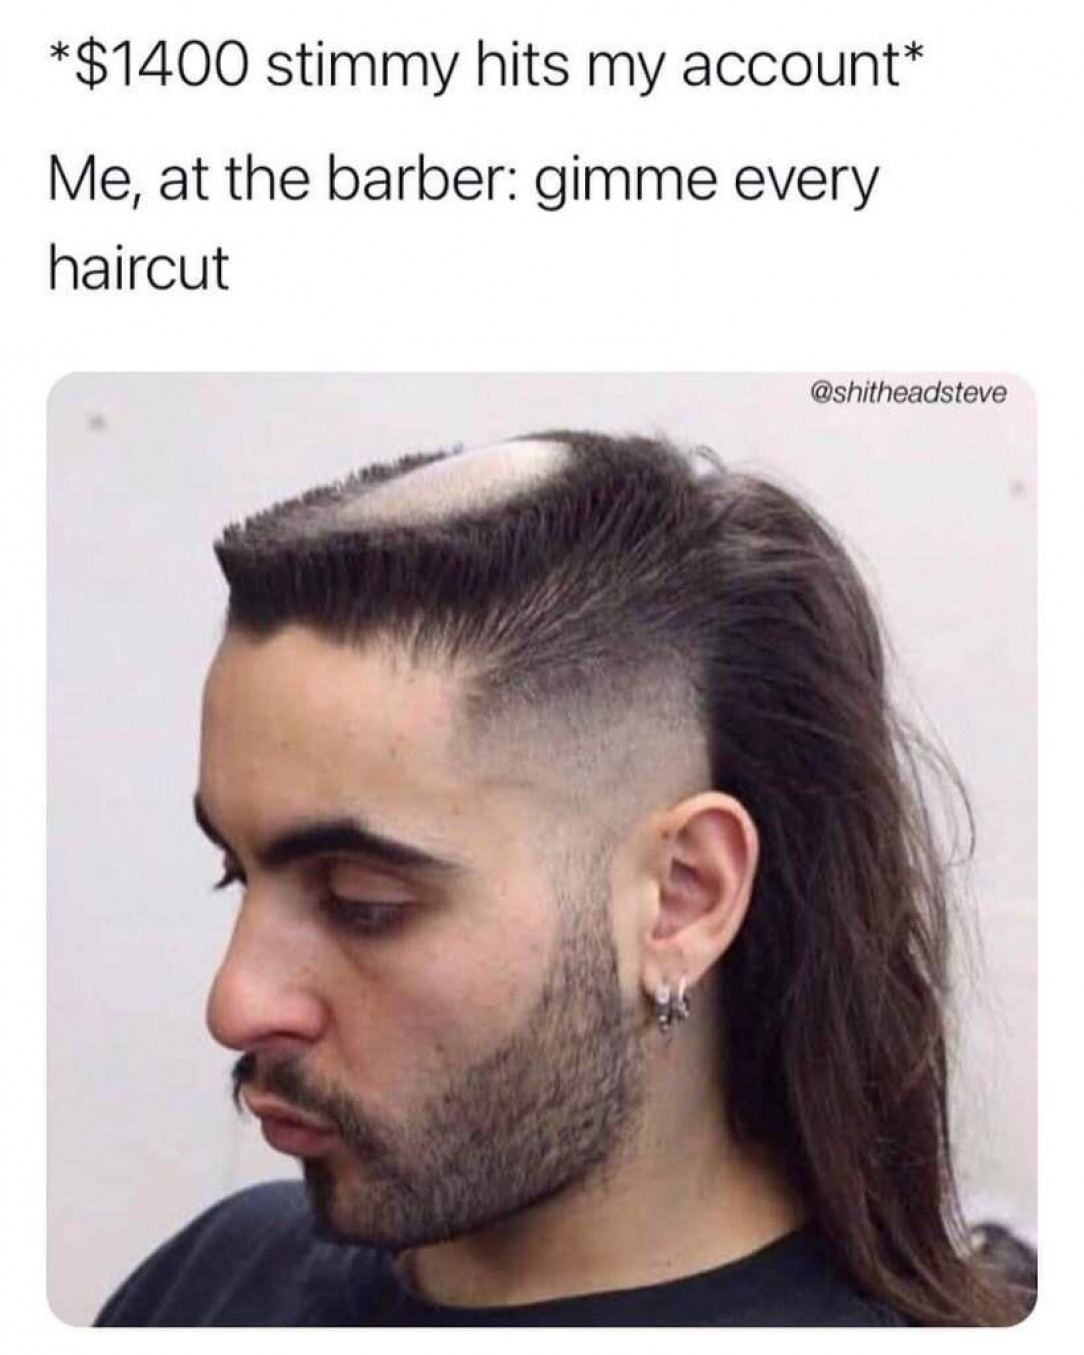 The new hairstyle trend